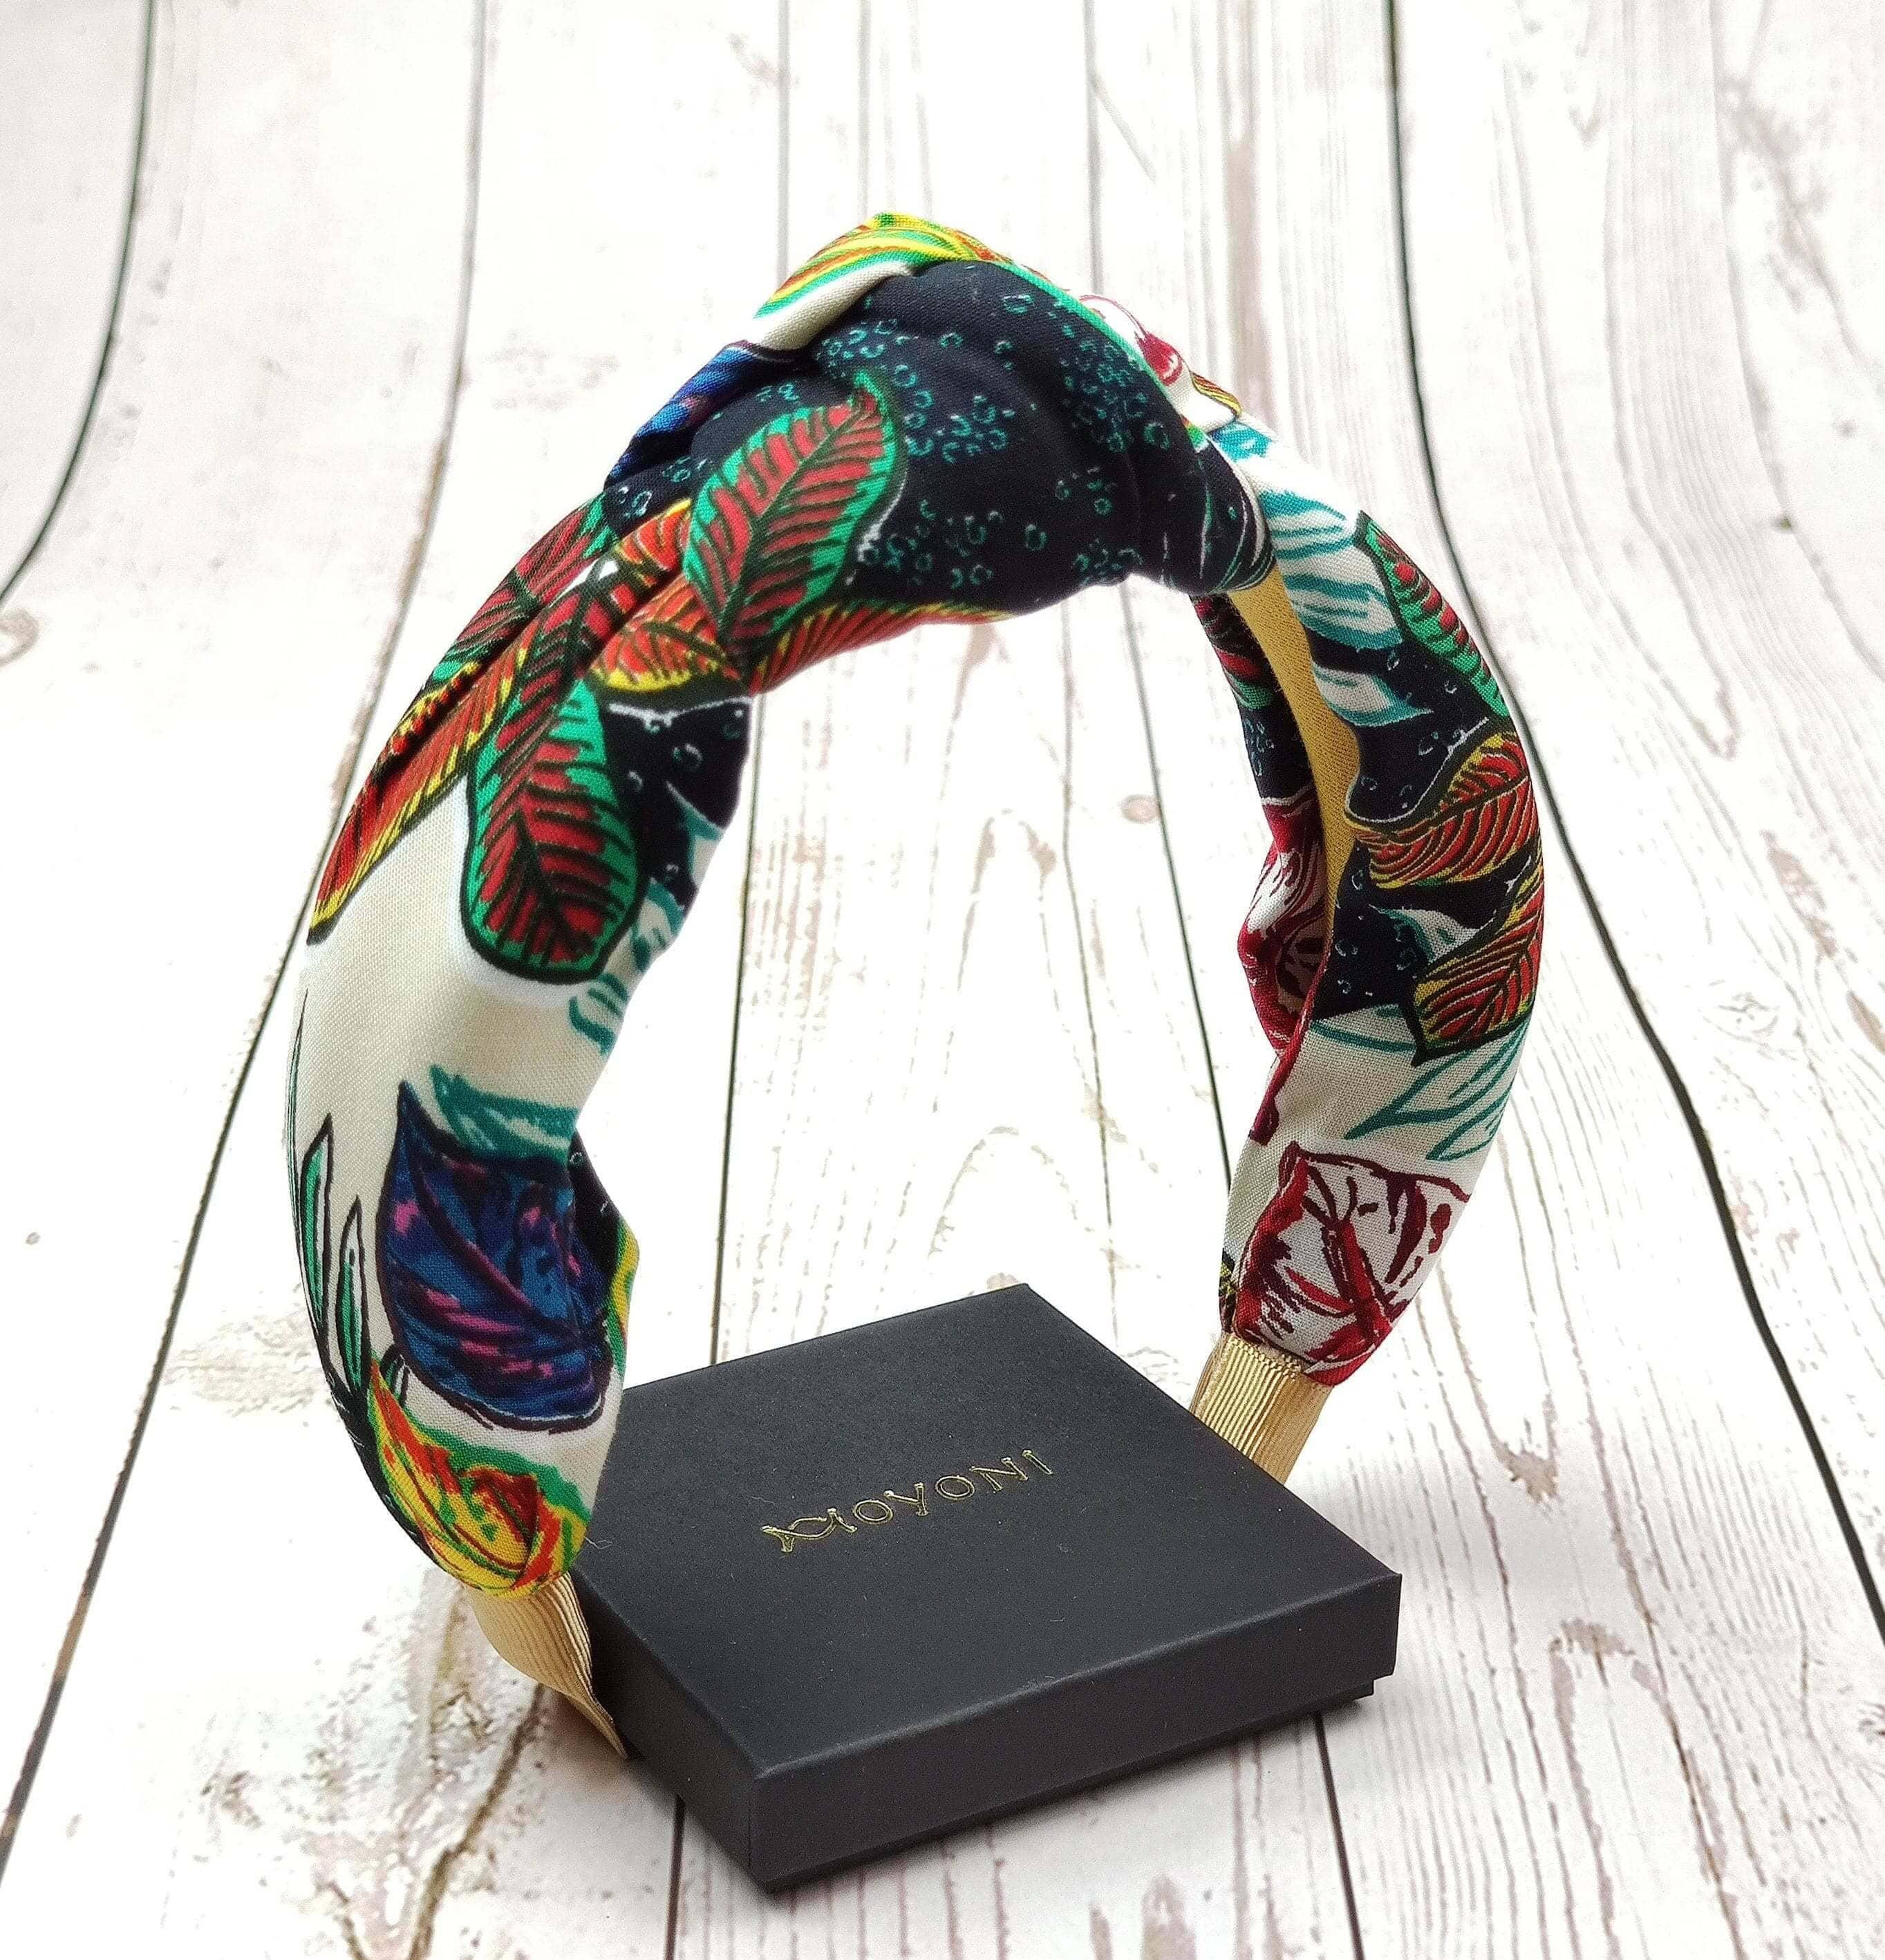 Stylish Stylish Knotted Headband for Women in Dark Blue, Yellow, Green, and Red Colors - Wide Cotton Padded Hairband for a Fashionable Look available at Moyoni Design